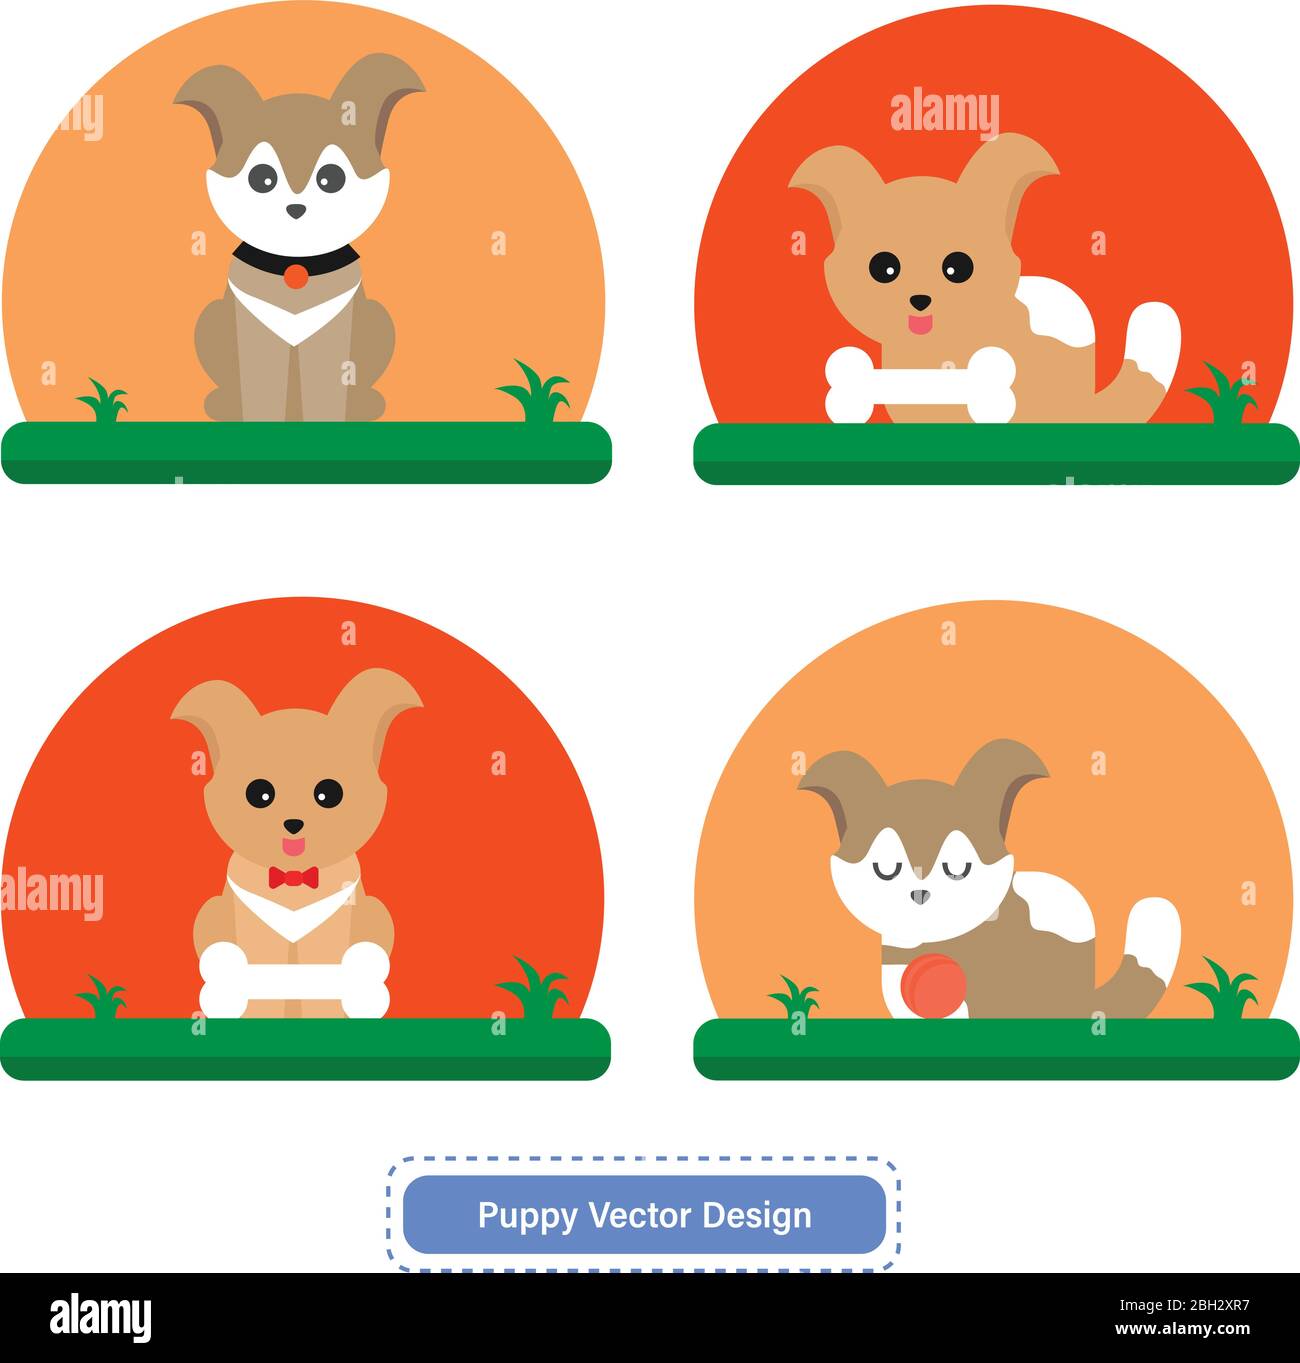 Cute Dog or Puppy Vector for icon templates or presentation background. Dog icon for pet shop logo. Able to use for website or mobile apps icon Stock Vector